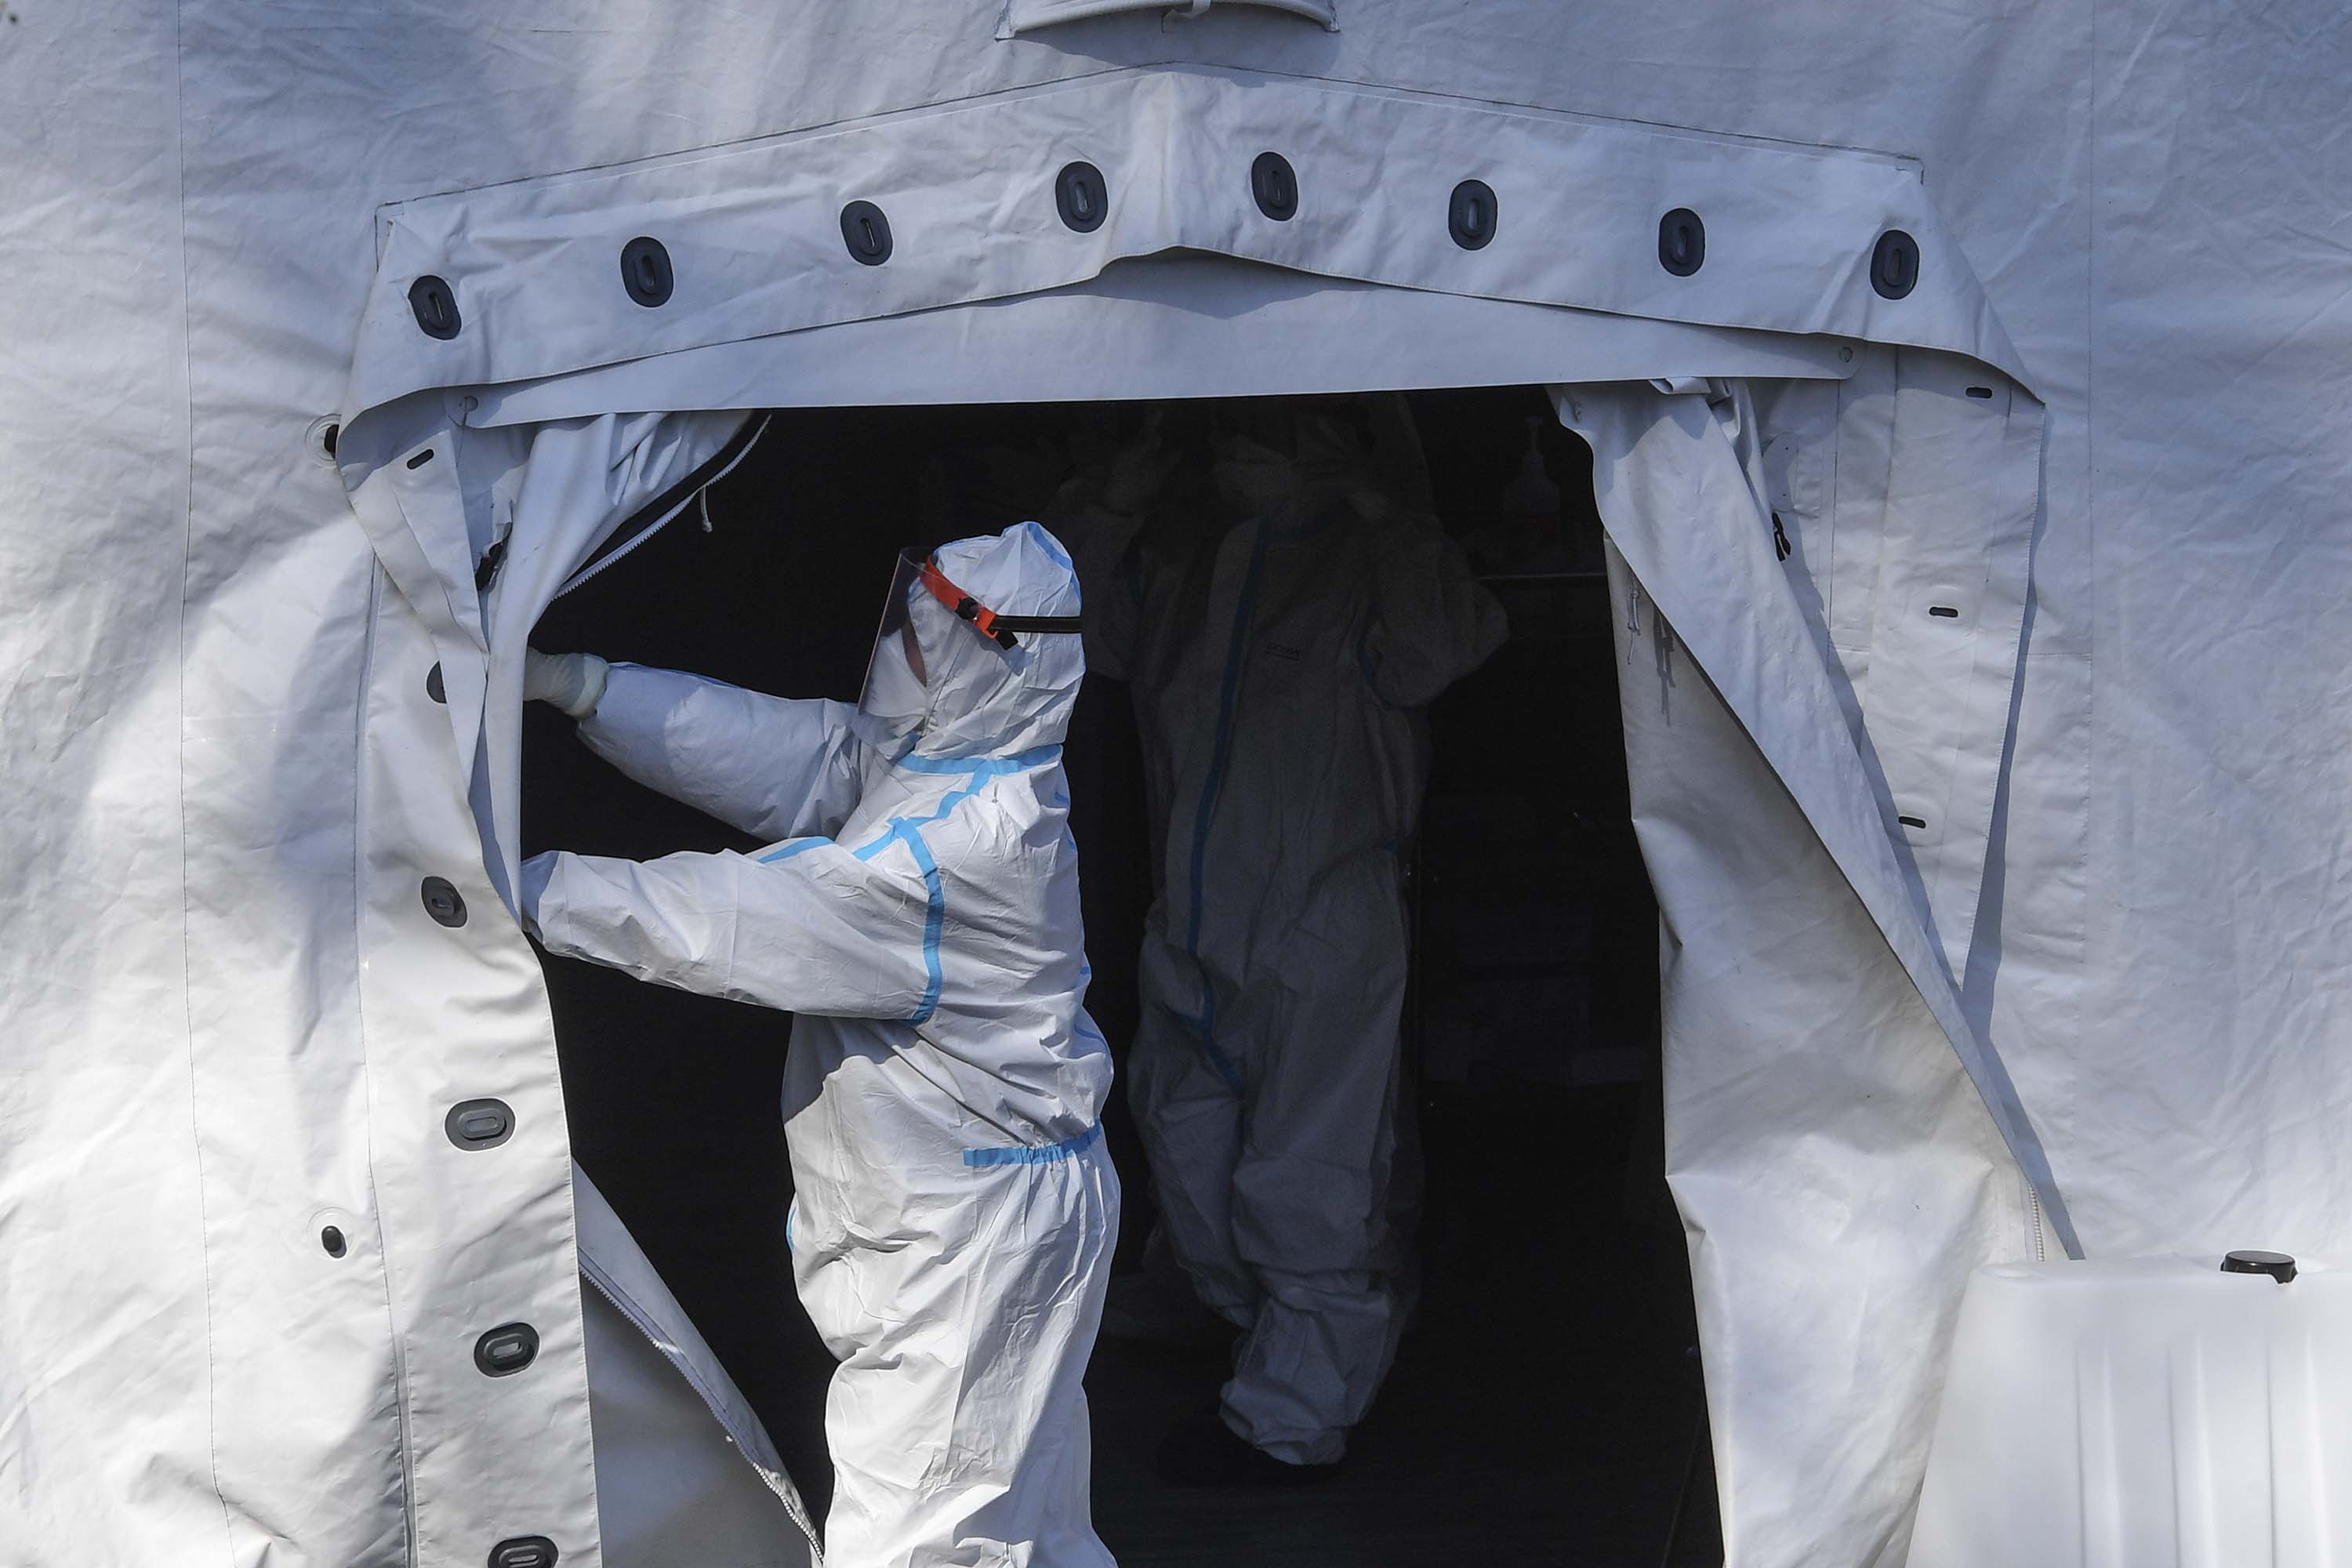 Doctors work at the pre-triage tent at the Cotugno hospital for infectious diseases in Naples, Italy, on March 23.